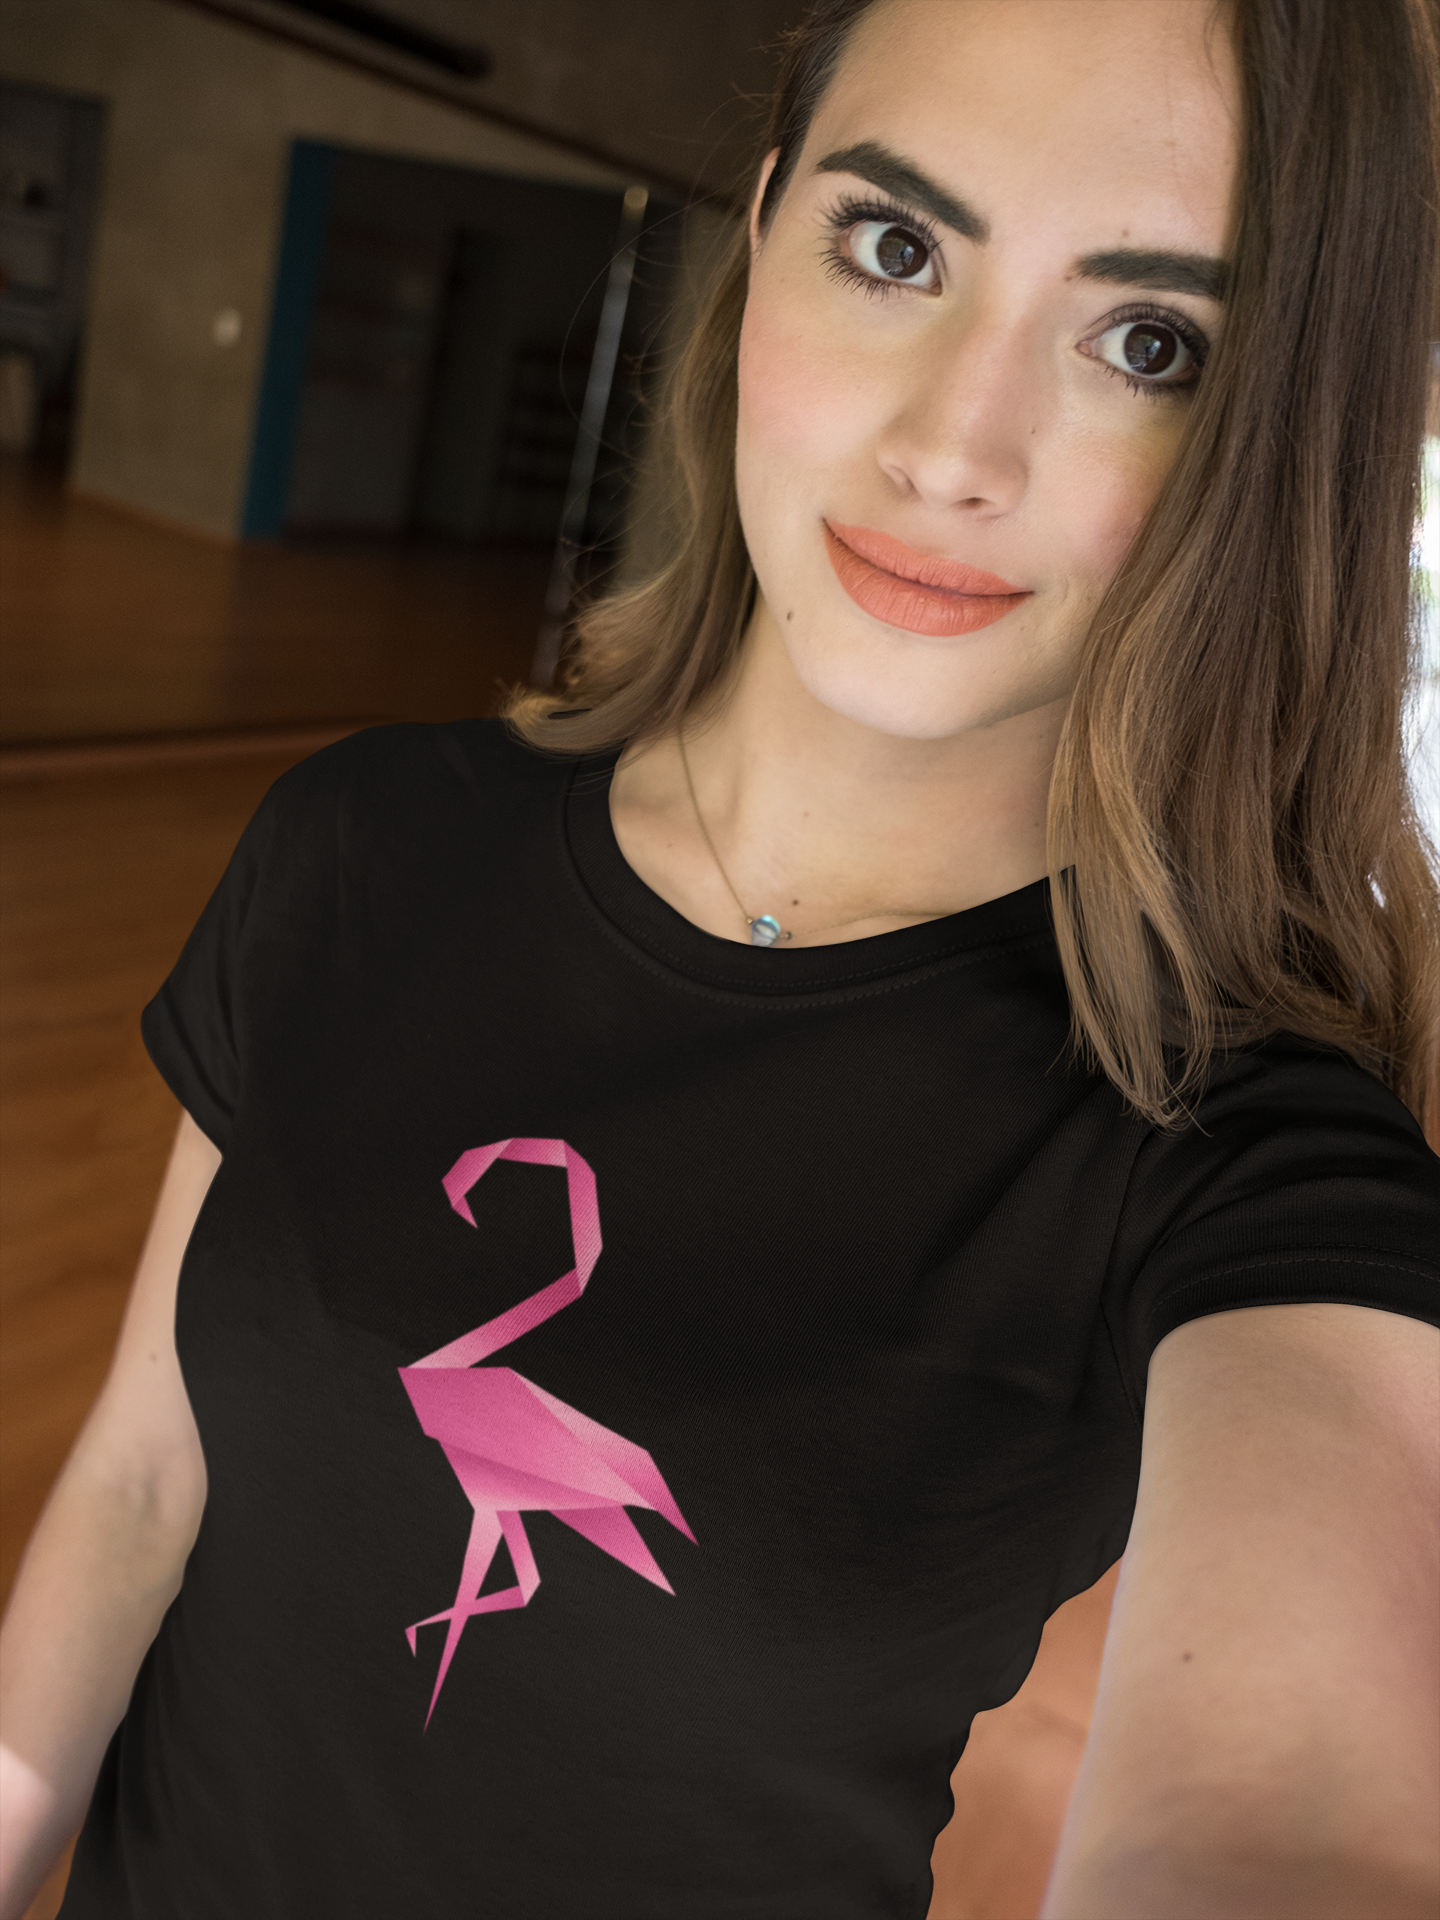 Flamingo Short-Sleeve Unisex T-Shirt from Vluxe by Lucky Nahum